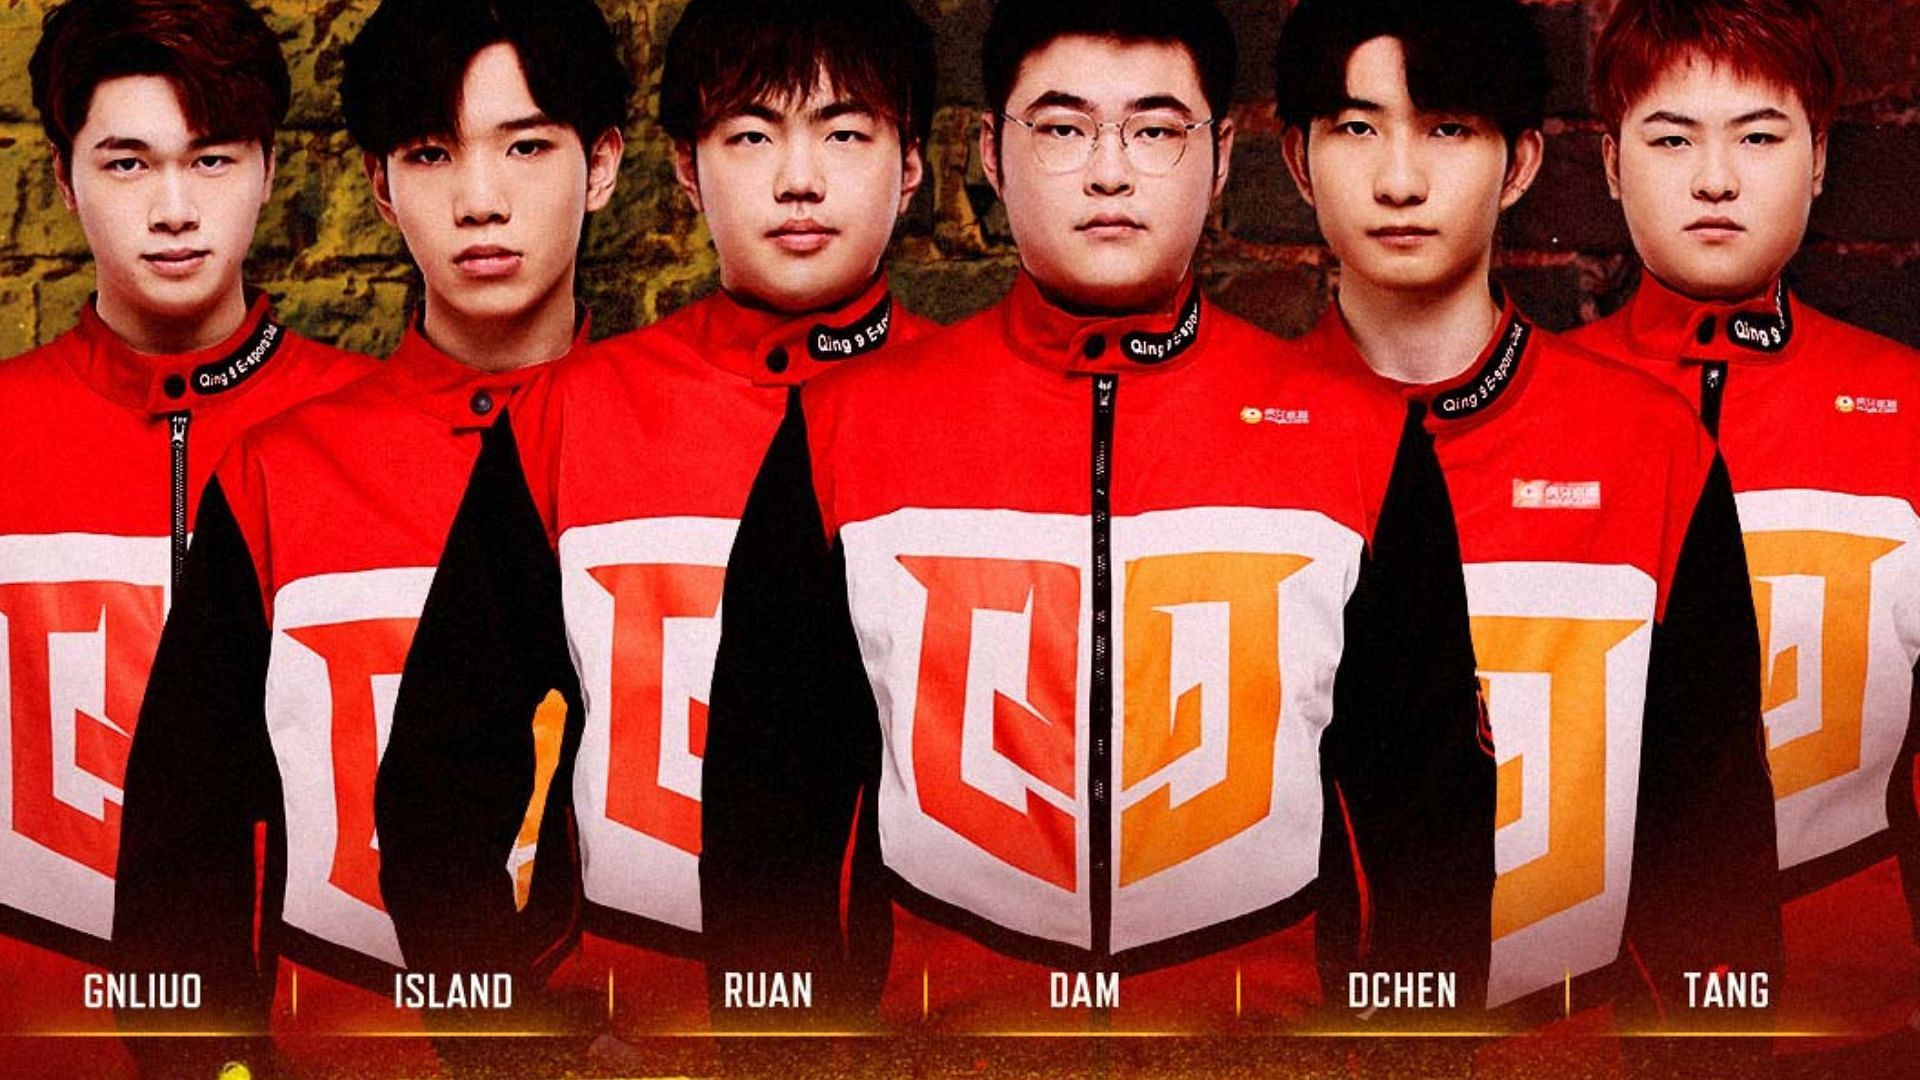 Qing Jiu Club finished second in COD Mobile Fall Invitational 2022 (Image via Activision)